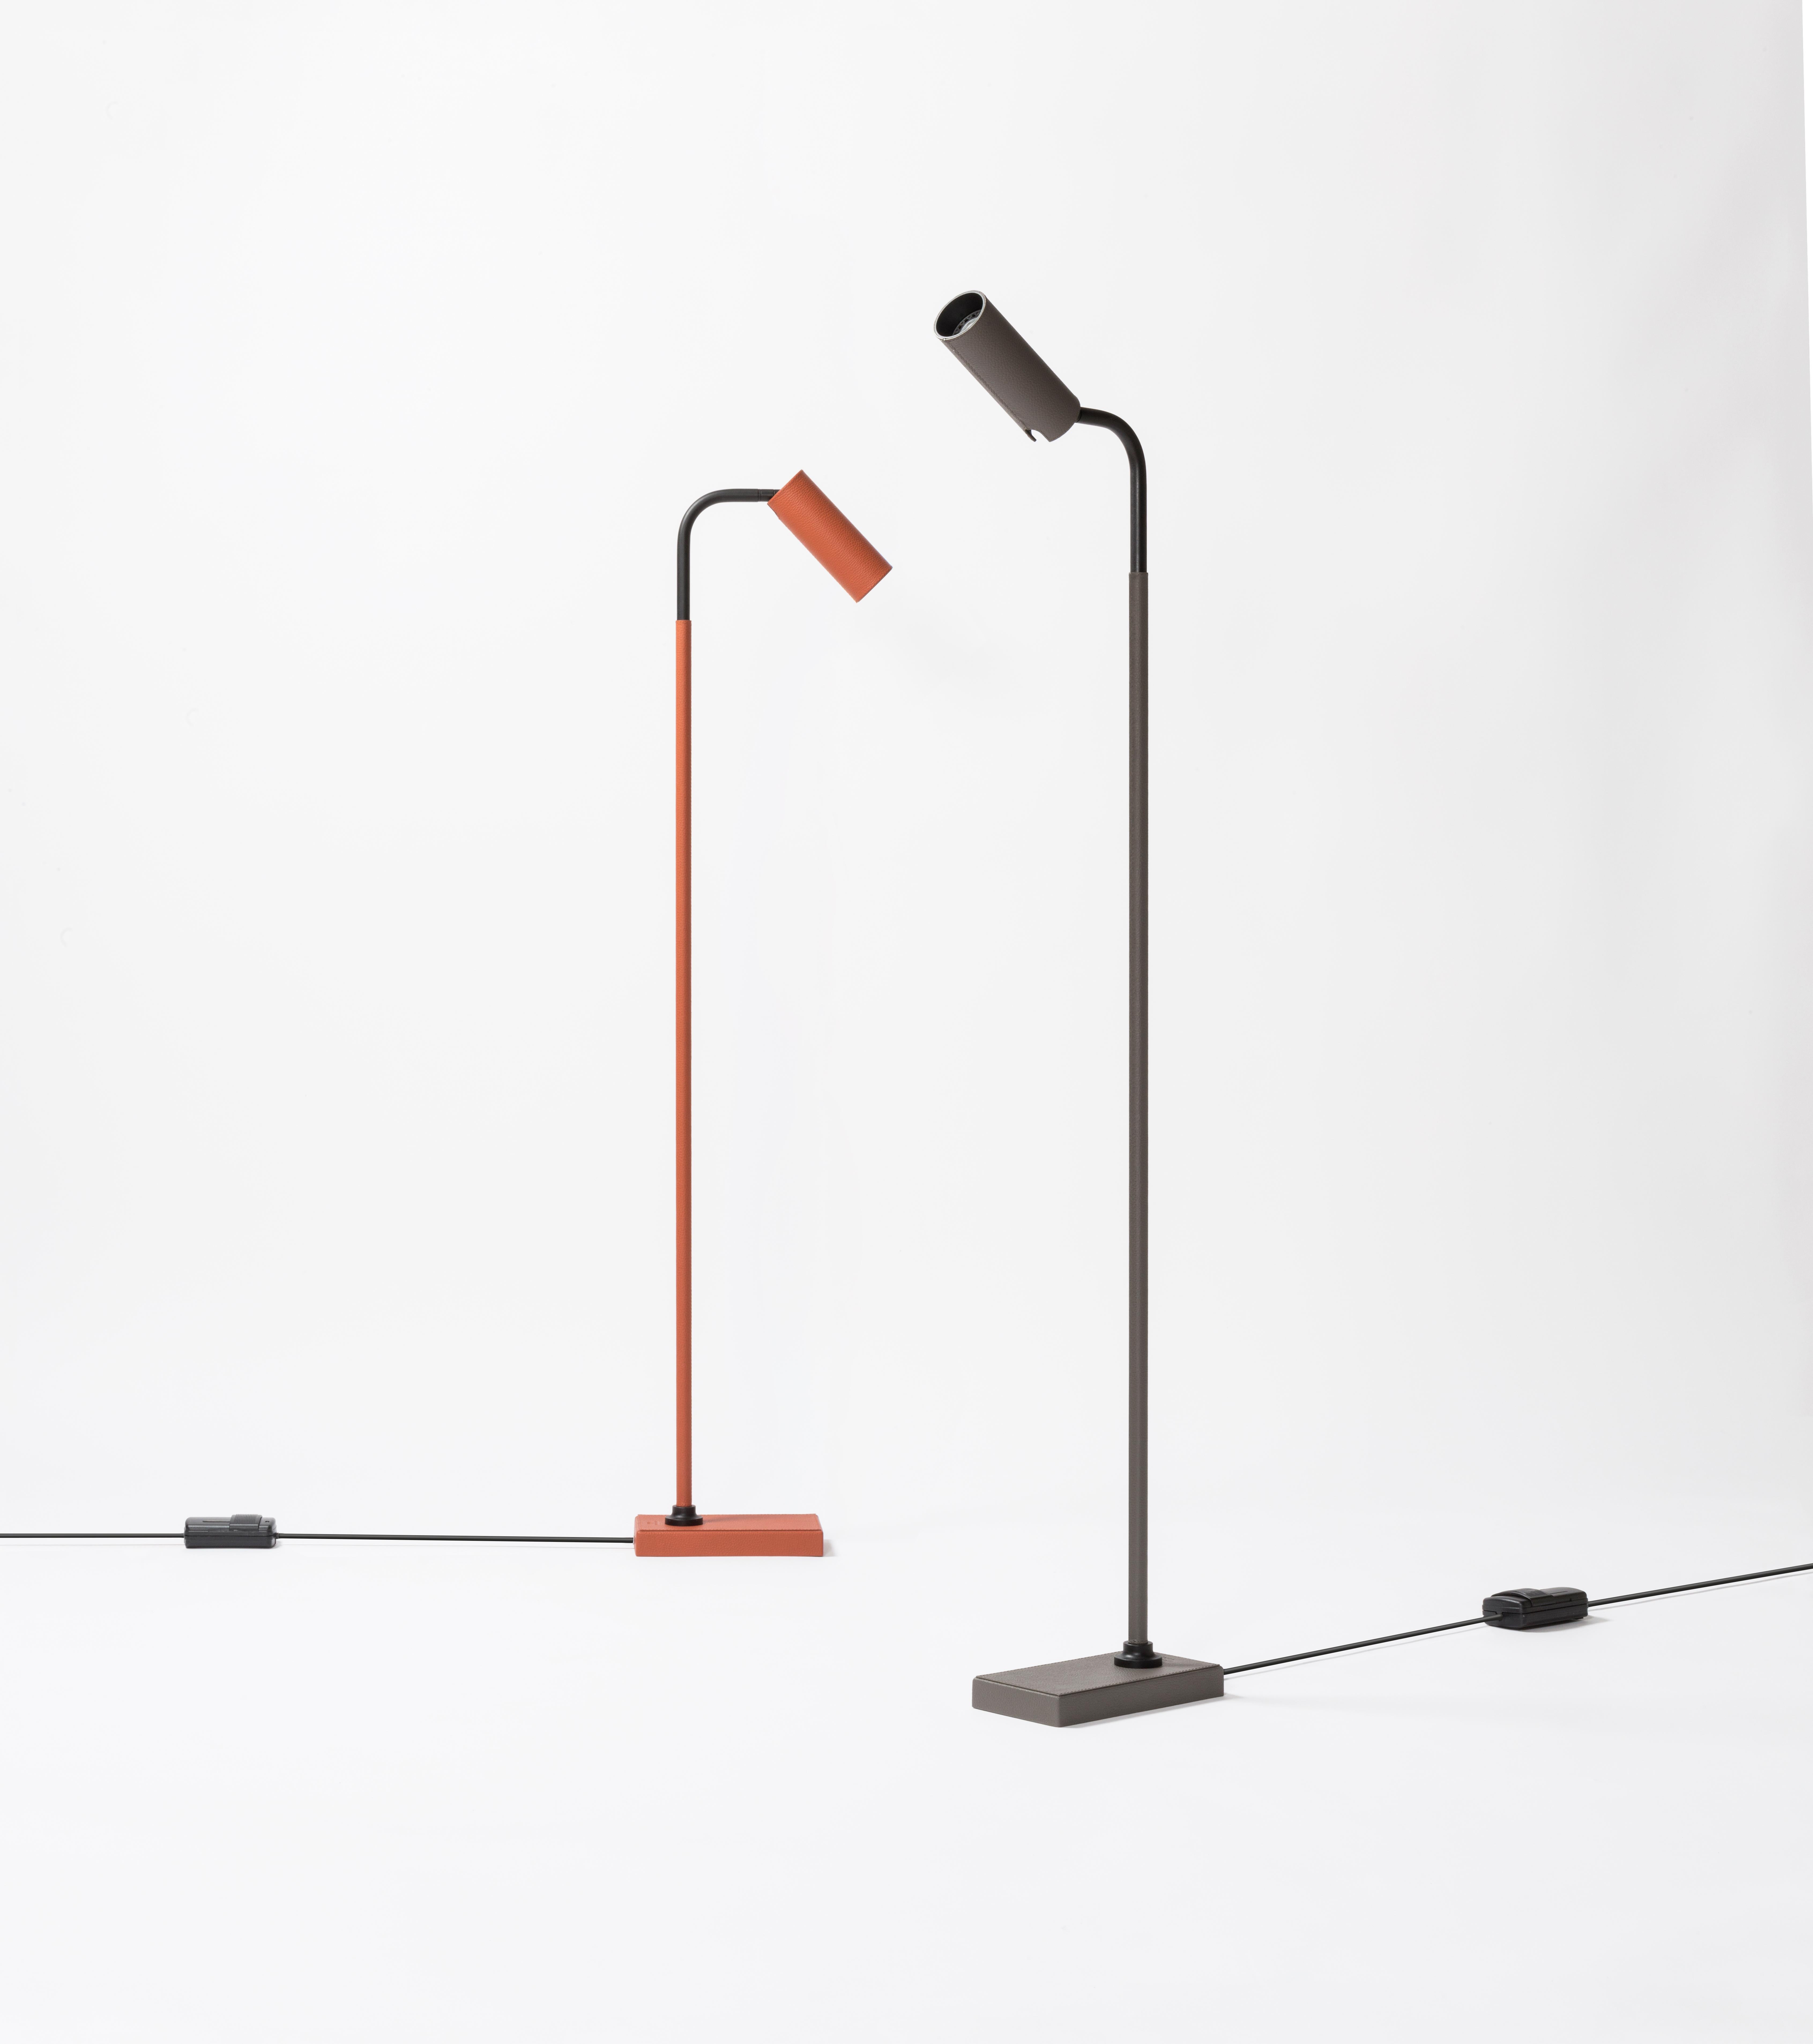 Pedestal reading lamp with a rectangular weighted base, vertical arm and a vertical placed tube on knuckle joint, 350° turnable, 90° adjustable, with GU10 lamp holder, 2 meter cable, plug and foot dimmer. Measures: Aluminium tube diameter 55, height